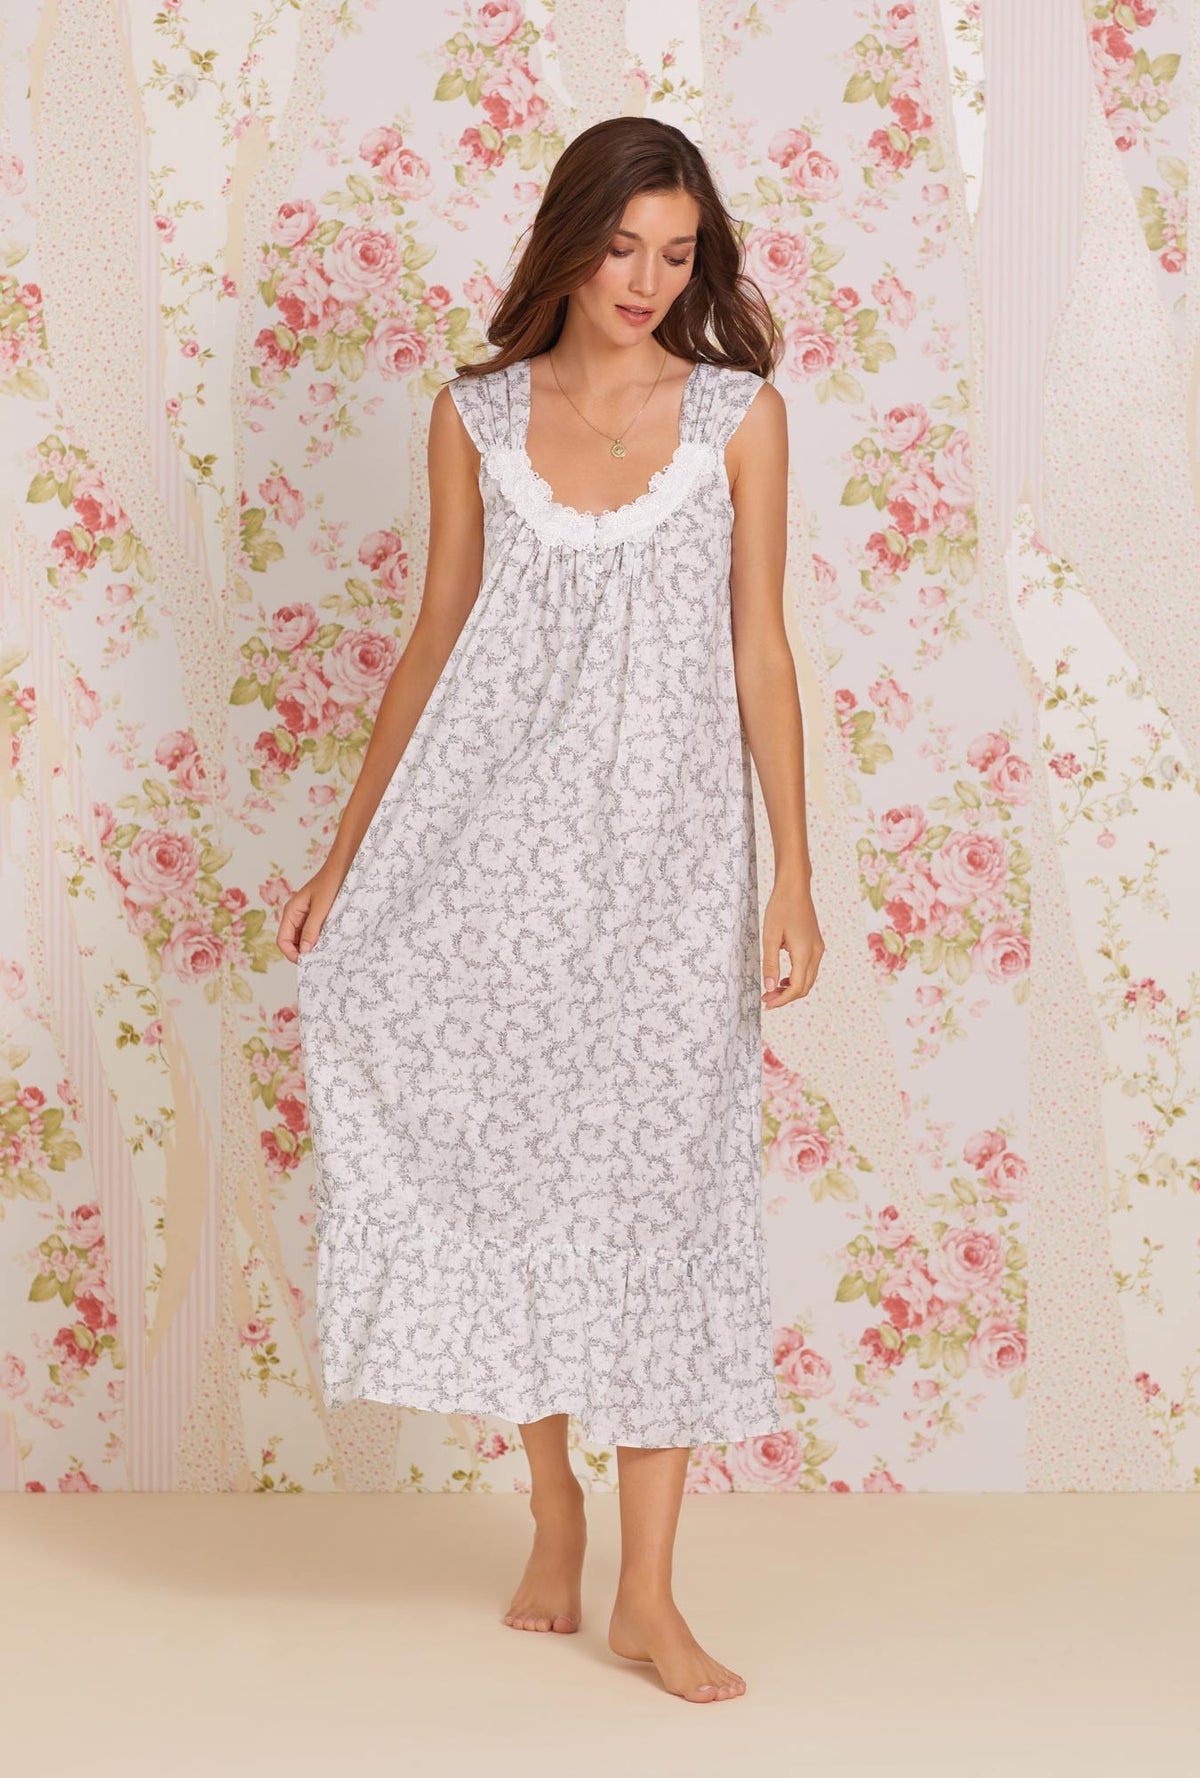 A lady wearing white sleeveless tabitha cotton nightgown with grey fleur print.